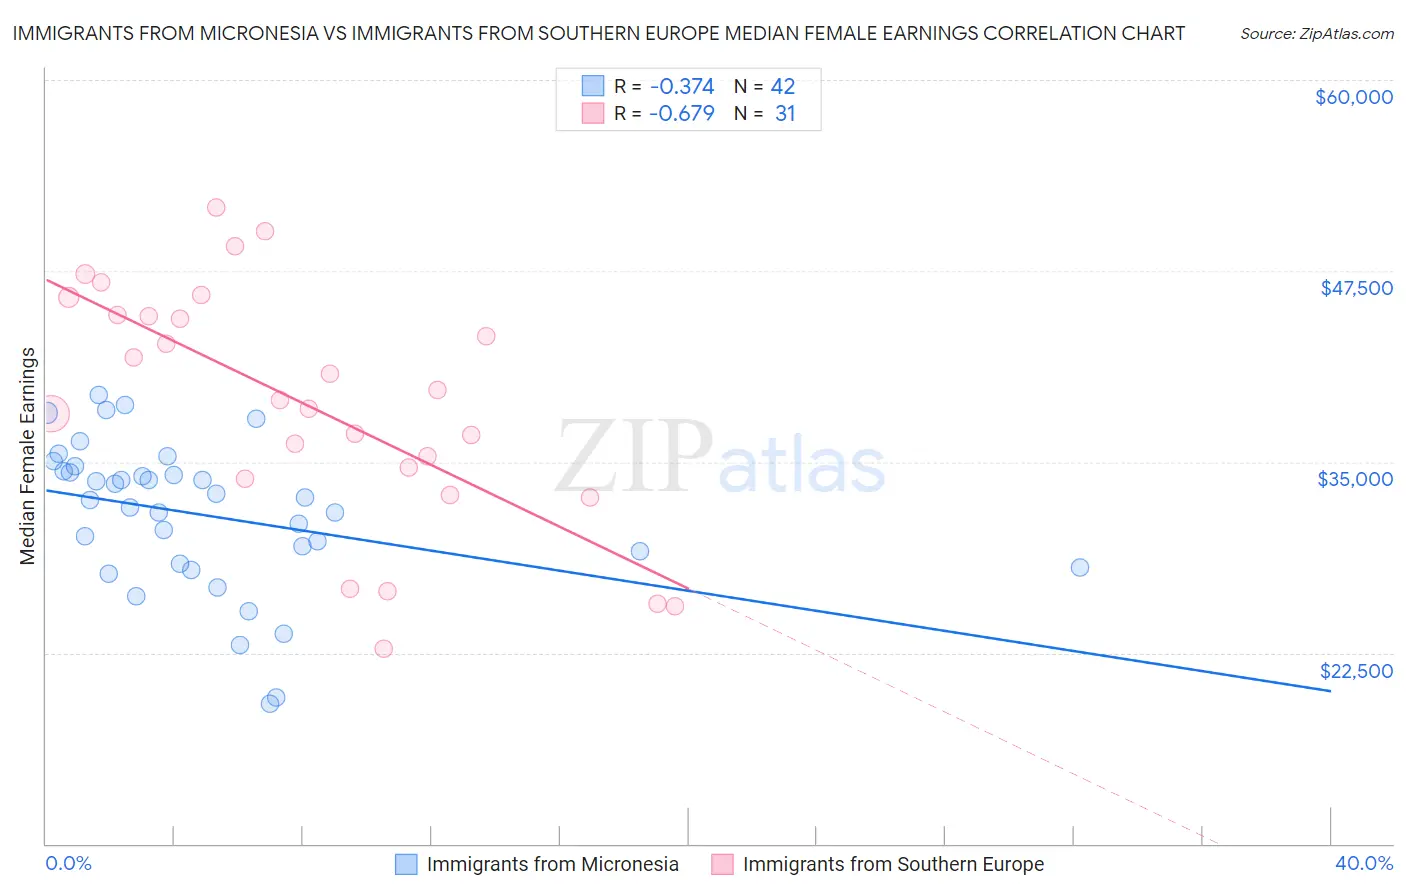 Immigrants from Micronesia vs Immigrants from Southern Europe Median Female Earnings